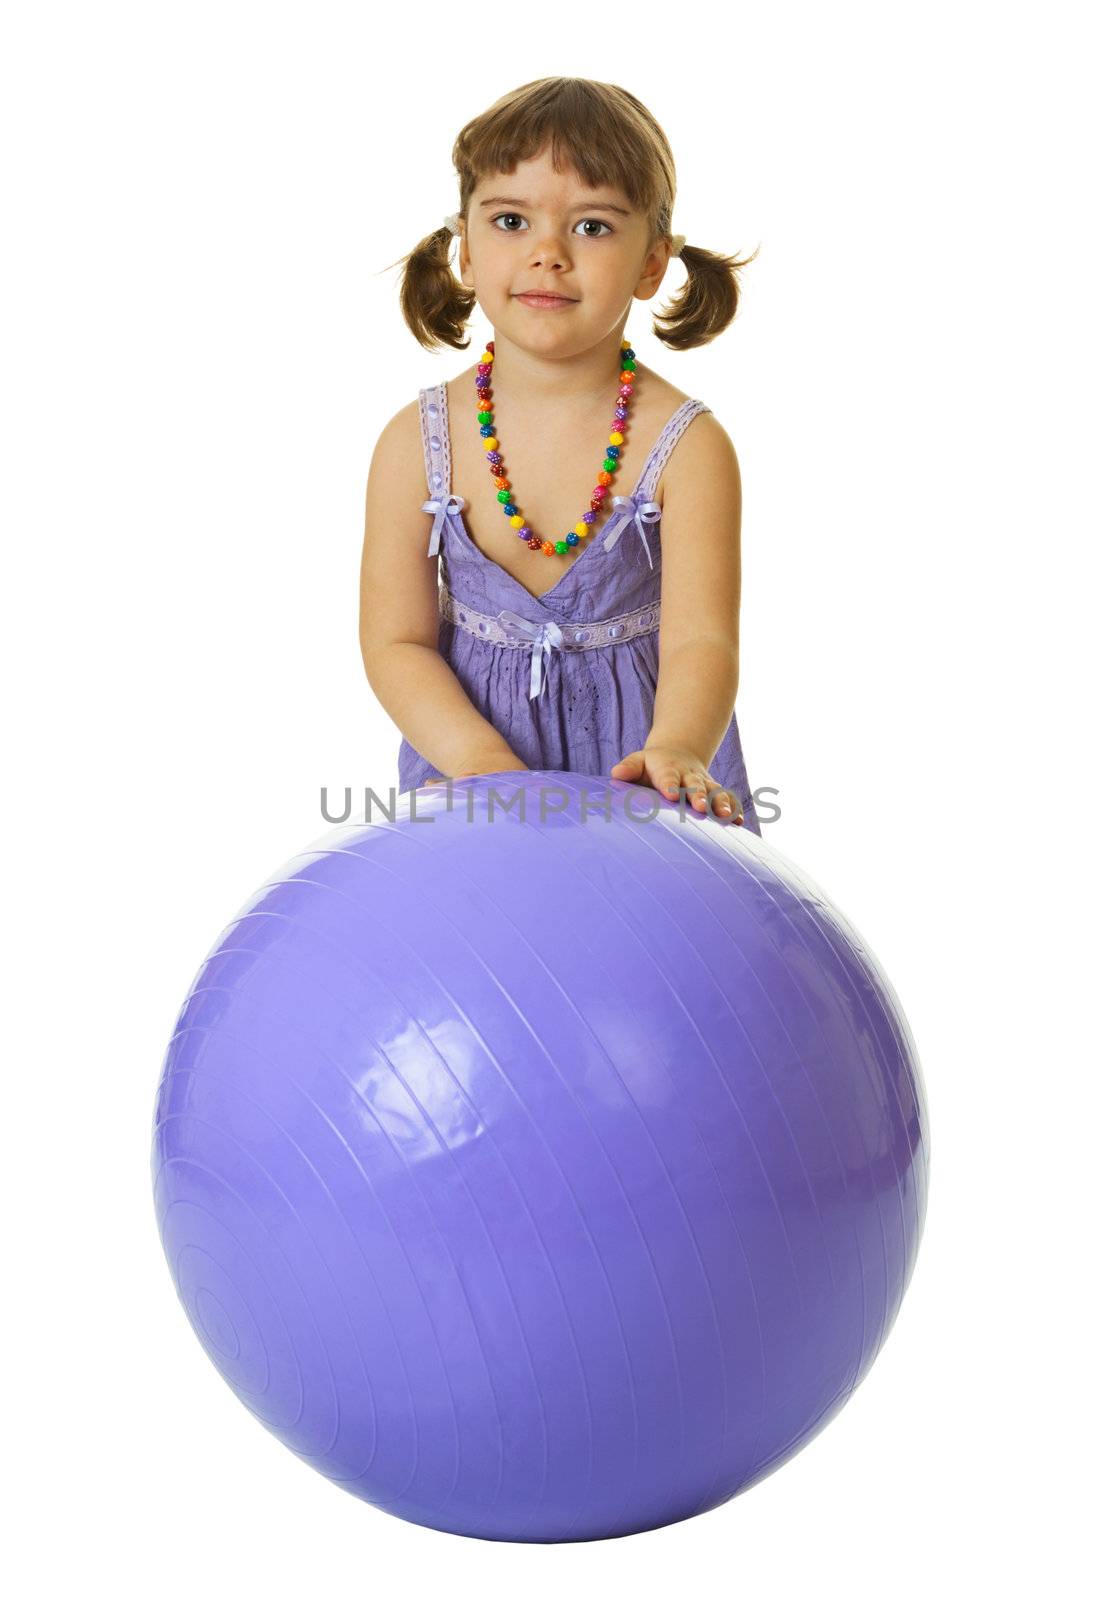 Little girl with a large rubber ball on white by pzaxe